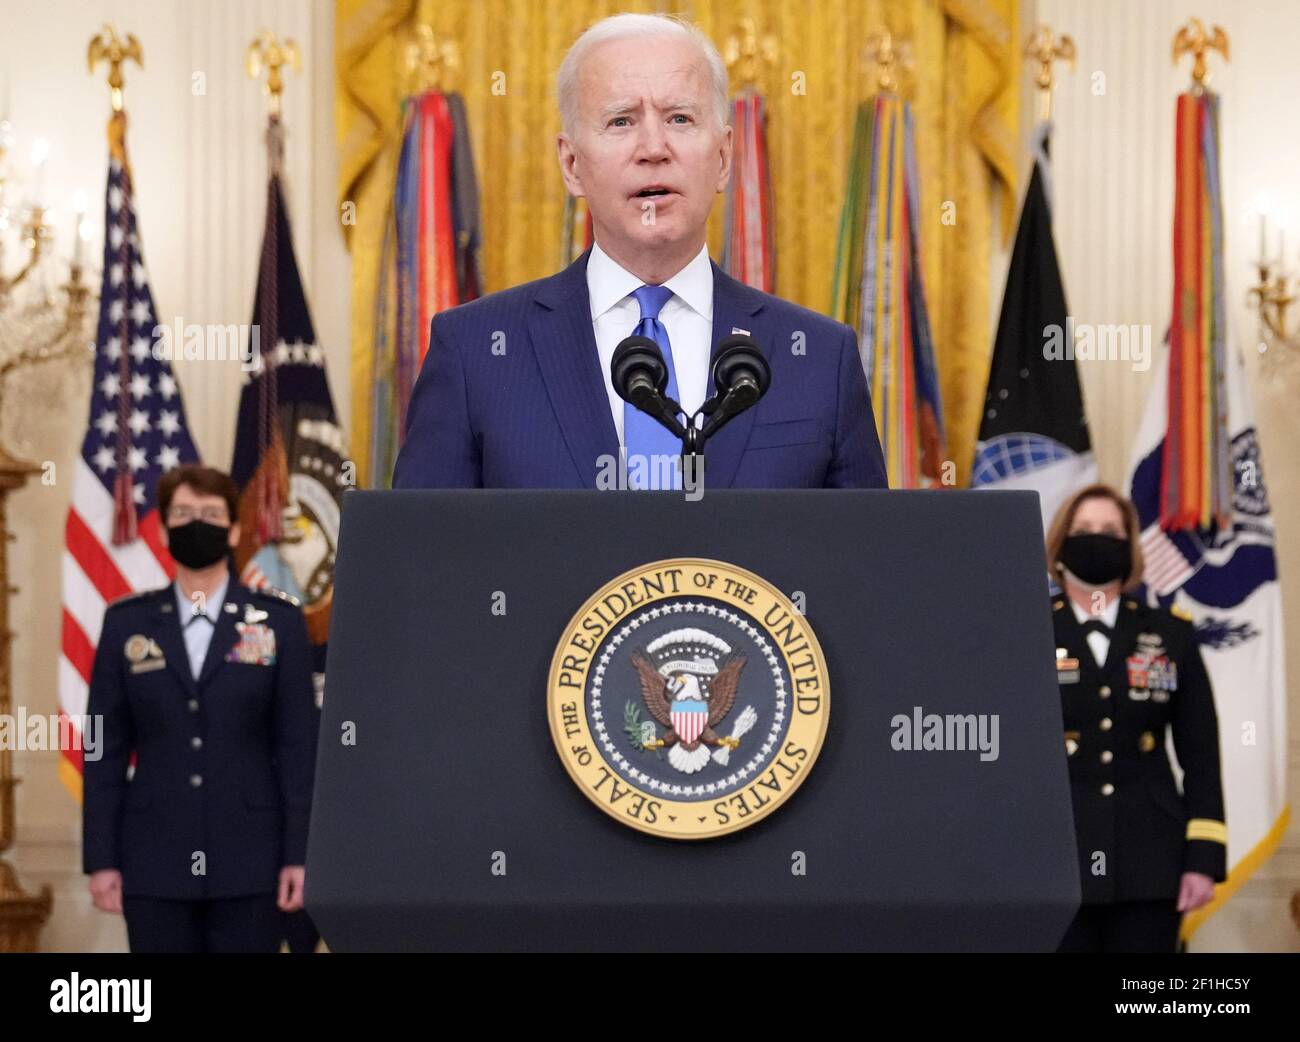 Washington, United States. 08th Mar, 2021. President Joe Biden delivers remarks at a Combatant Commander nomination event for, Air Force Gen. Jacqueline Van Ovost and Army Lt. Gen. Laura Richardson in the East Room at the White House in Washington, DC on Monday, March 8, 2021. Ovost, has been nominated to lead the Transportation Command and Richardson, has been nominated to lead military activities in Latin America at Southern Command. Photo by Kevin Dietsch/UPI Credit: UPI/Alamy Live News Stock Photo